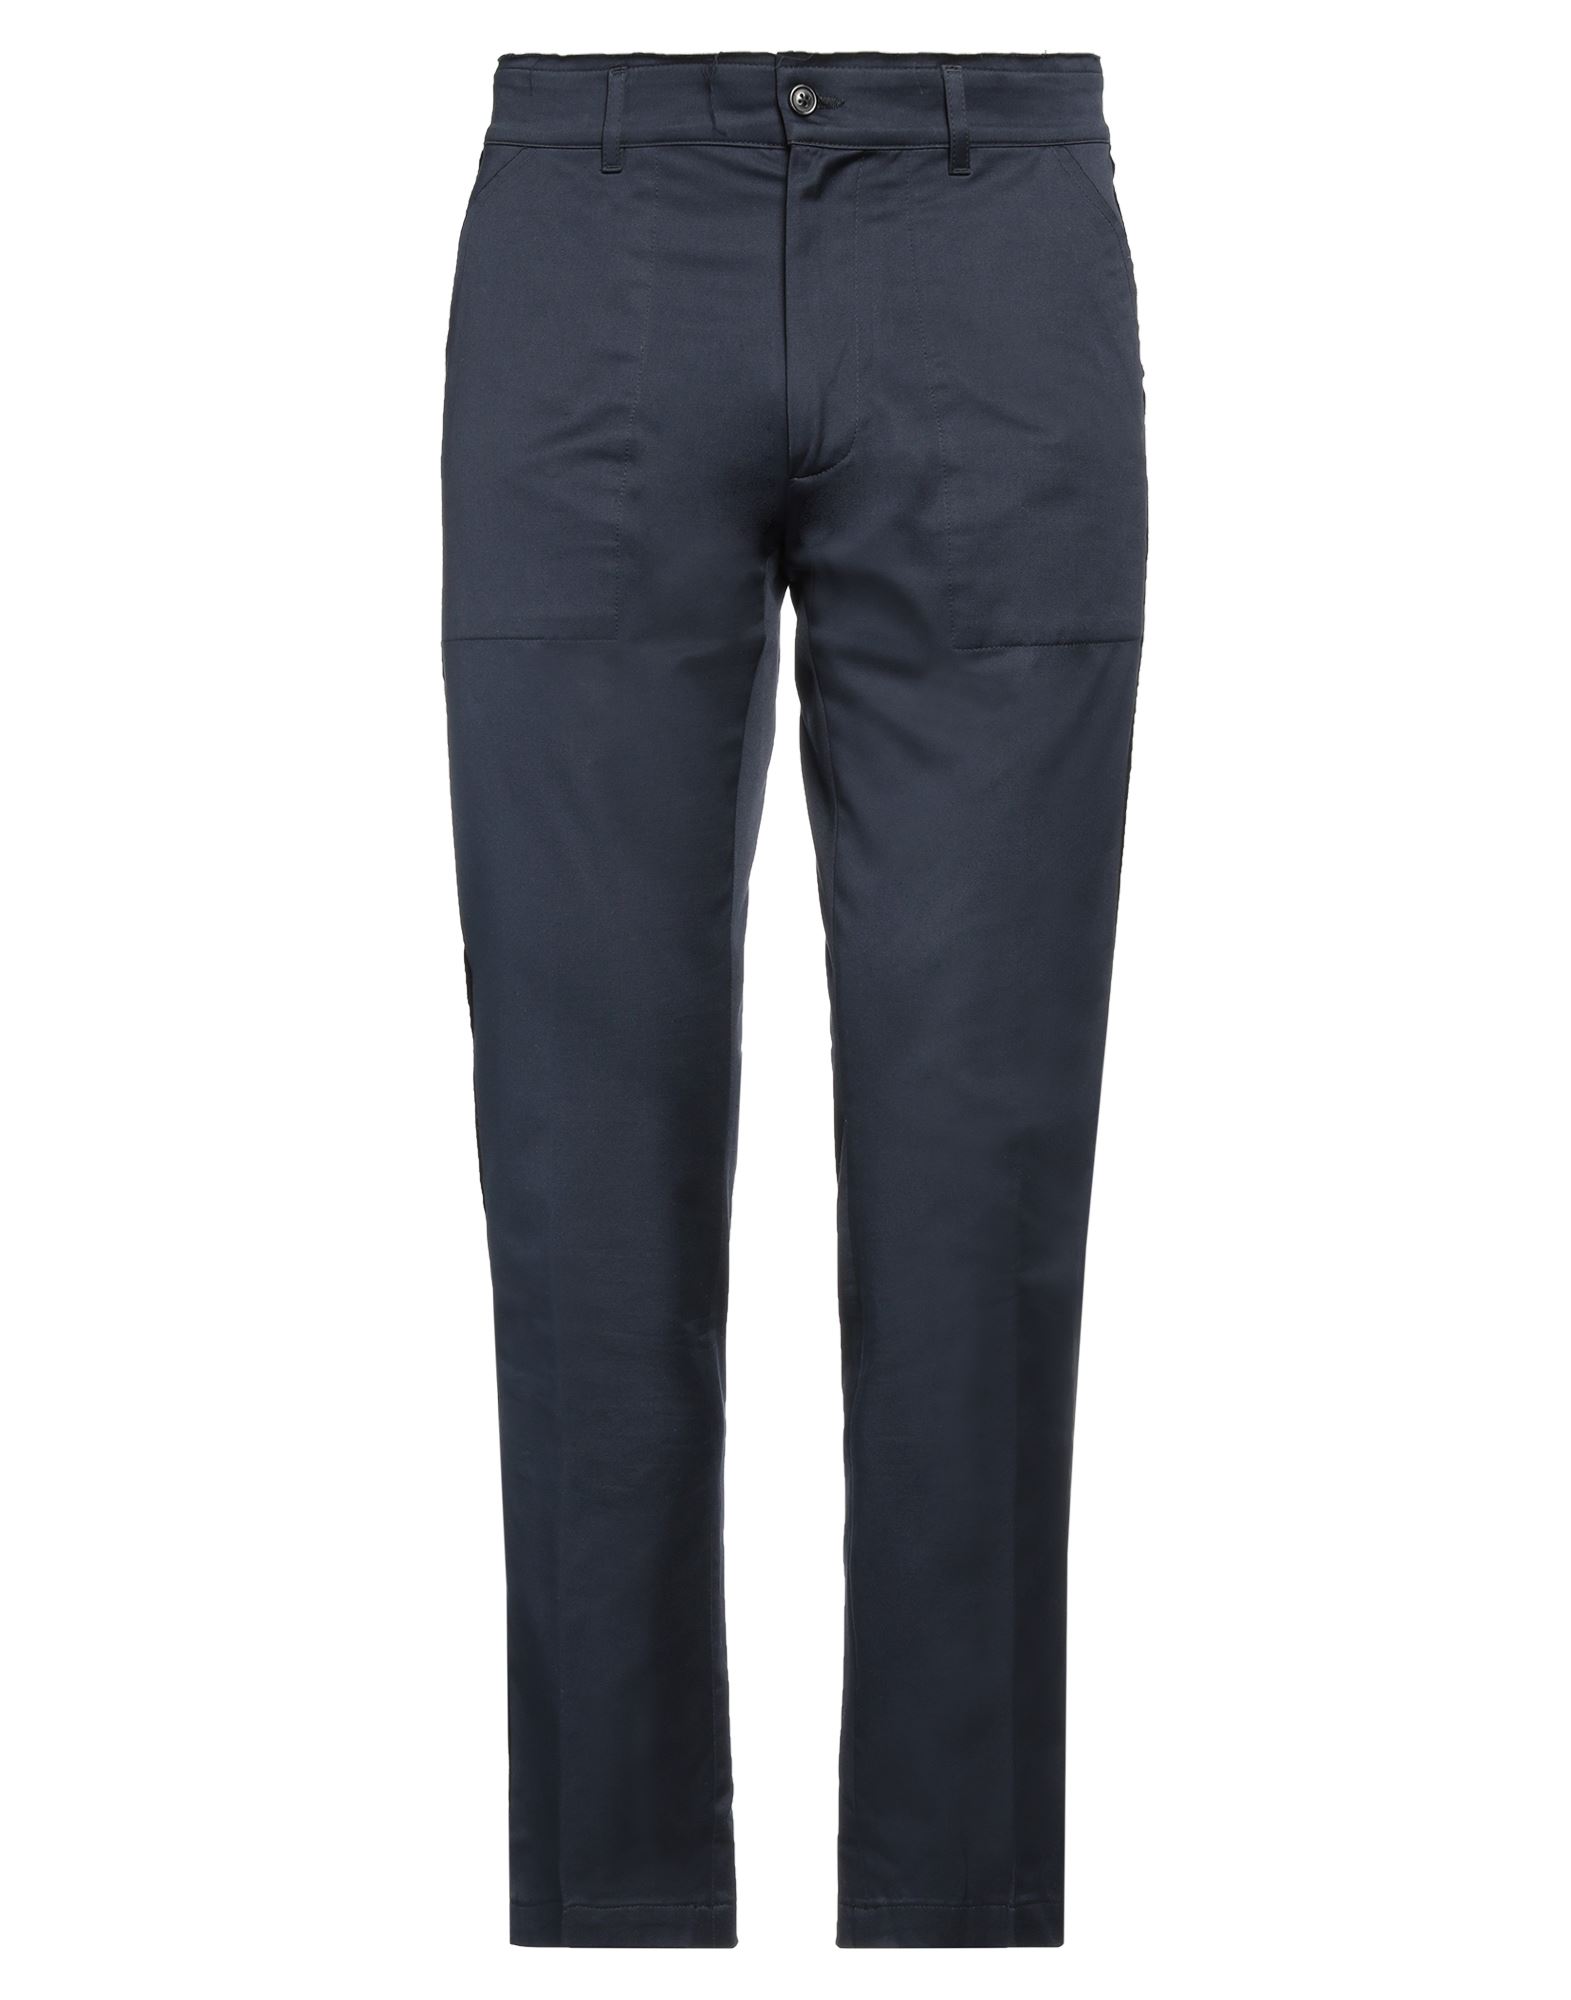 Mauro Grifoni Pants In Navy Blue